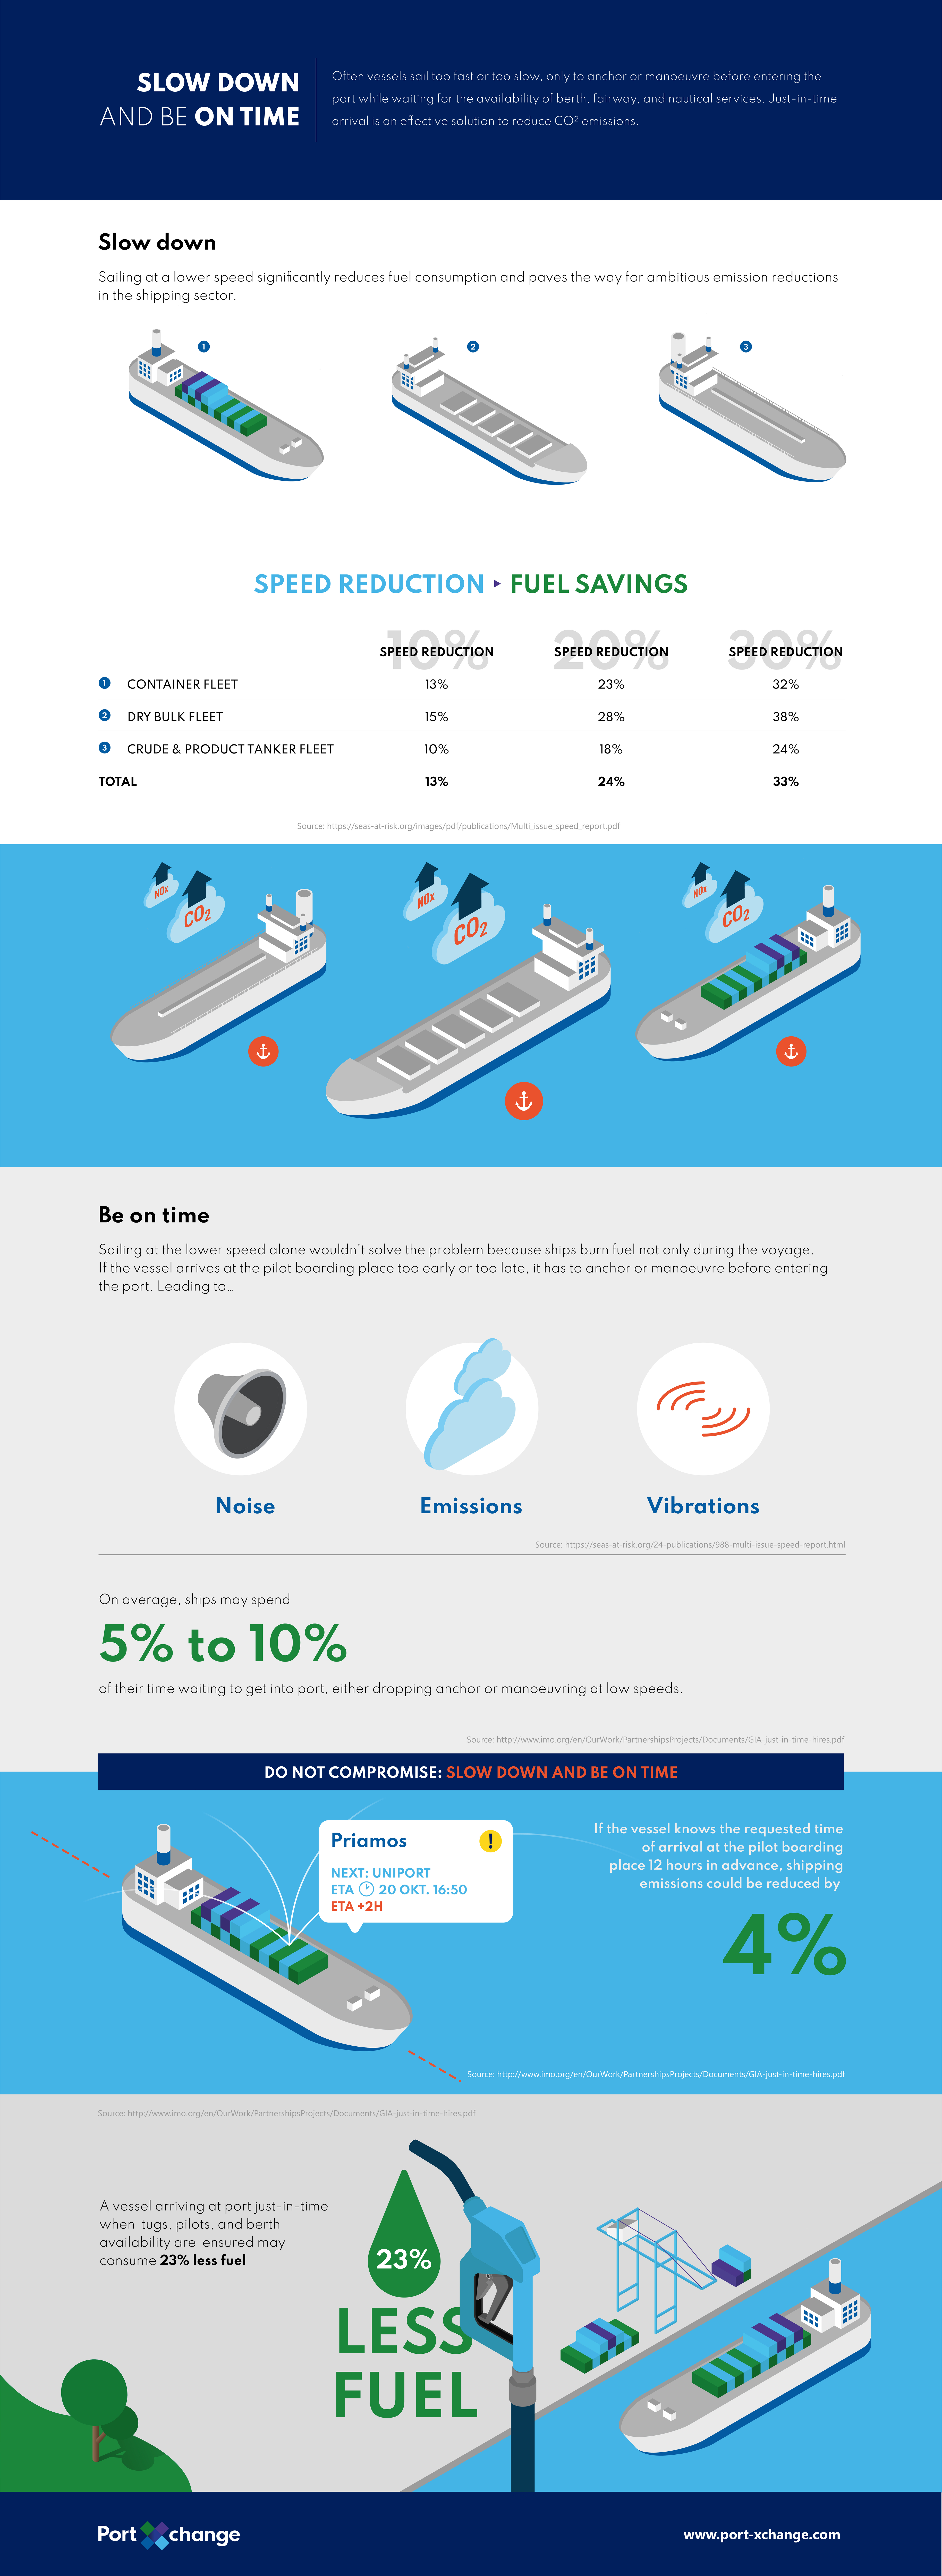 PortXCcange Infographic on Just in time arrivals